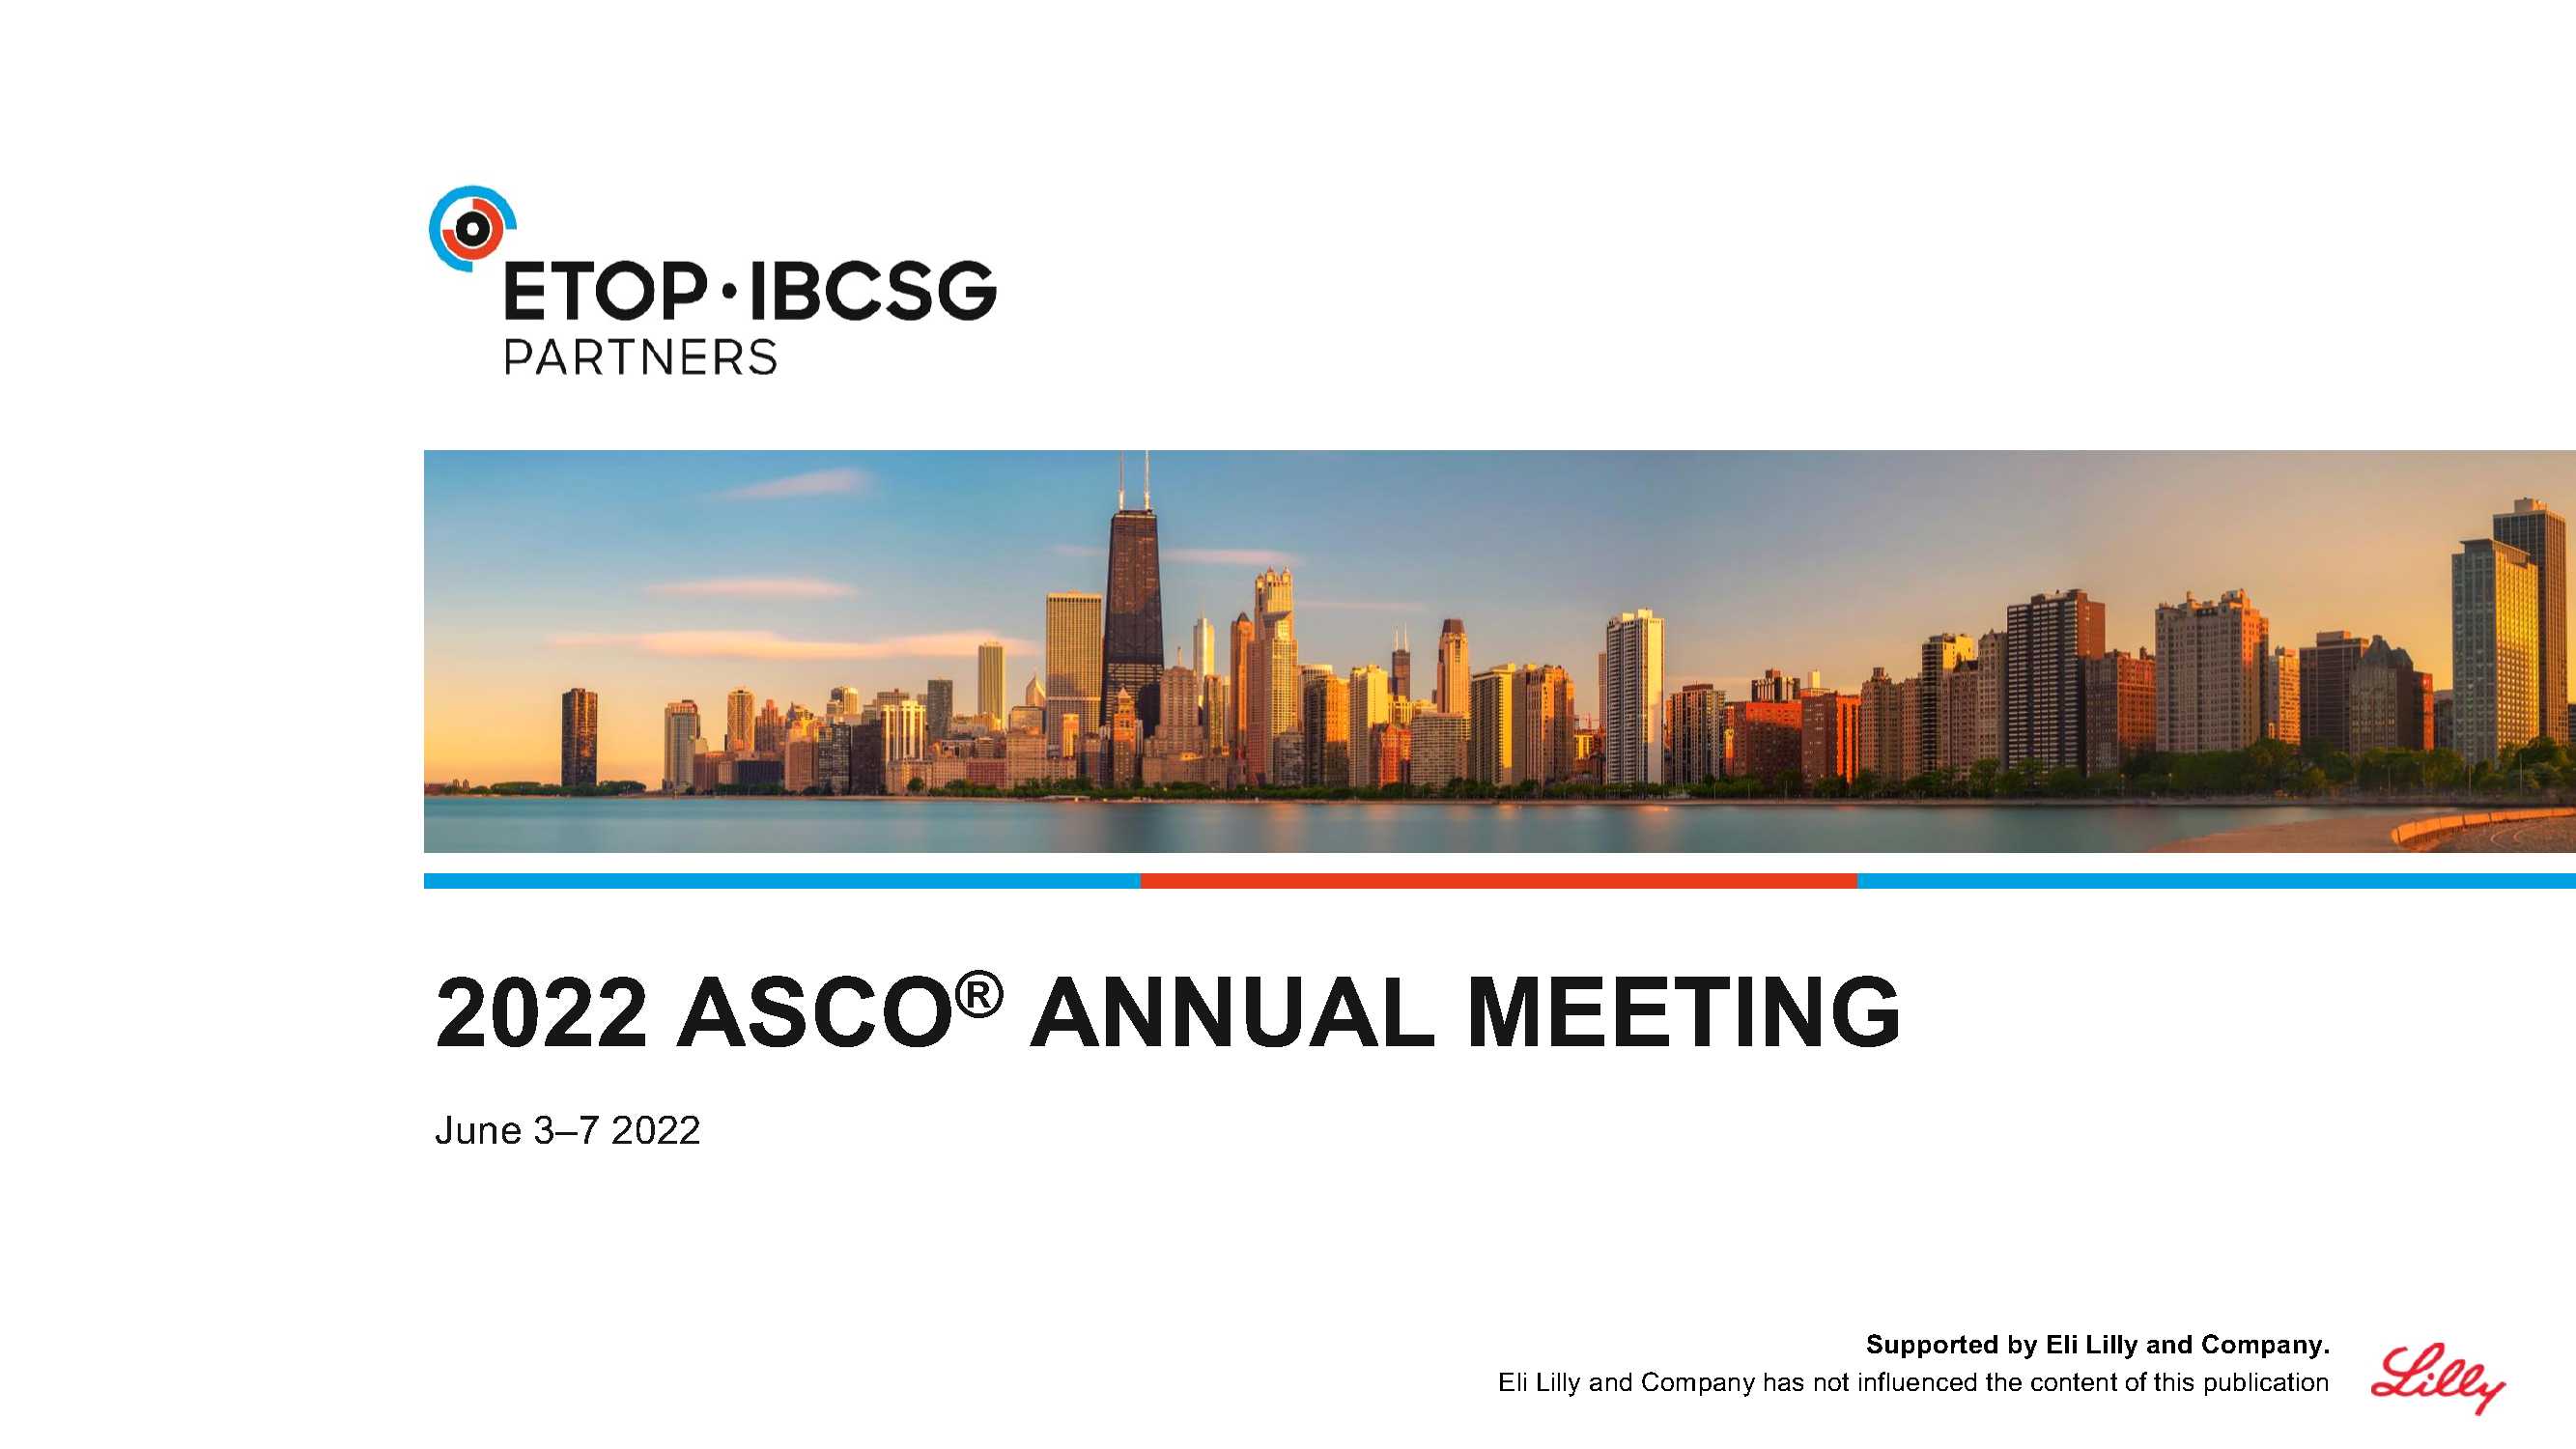 etop-slide-deck-from-2022-asco-annual-meeting